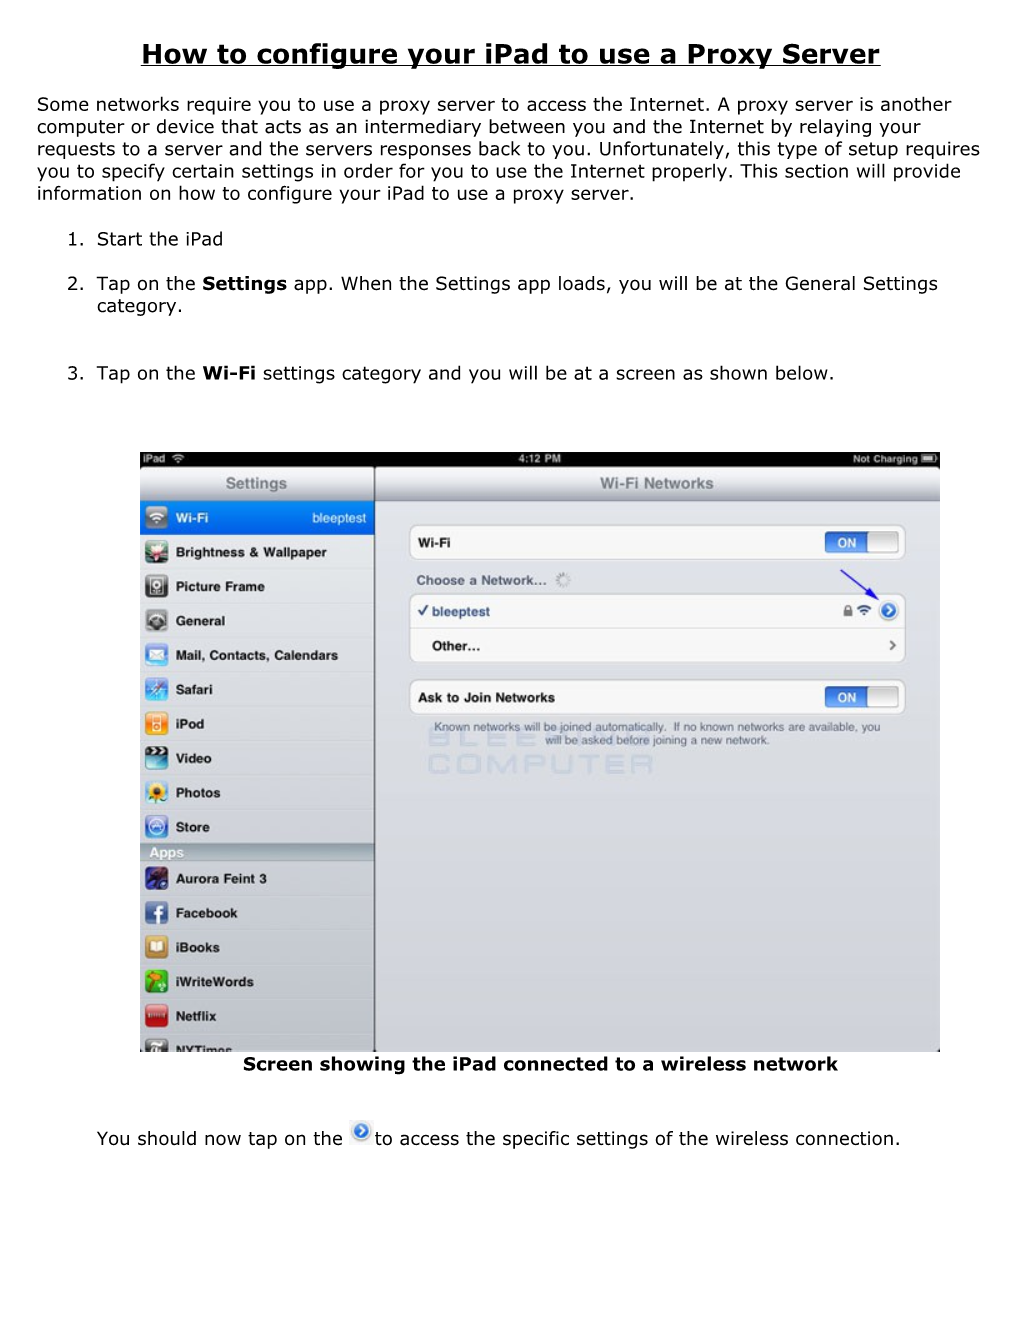 How to Configure Your Ipad to Use a Proxy Server